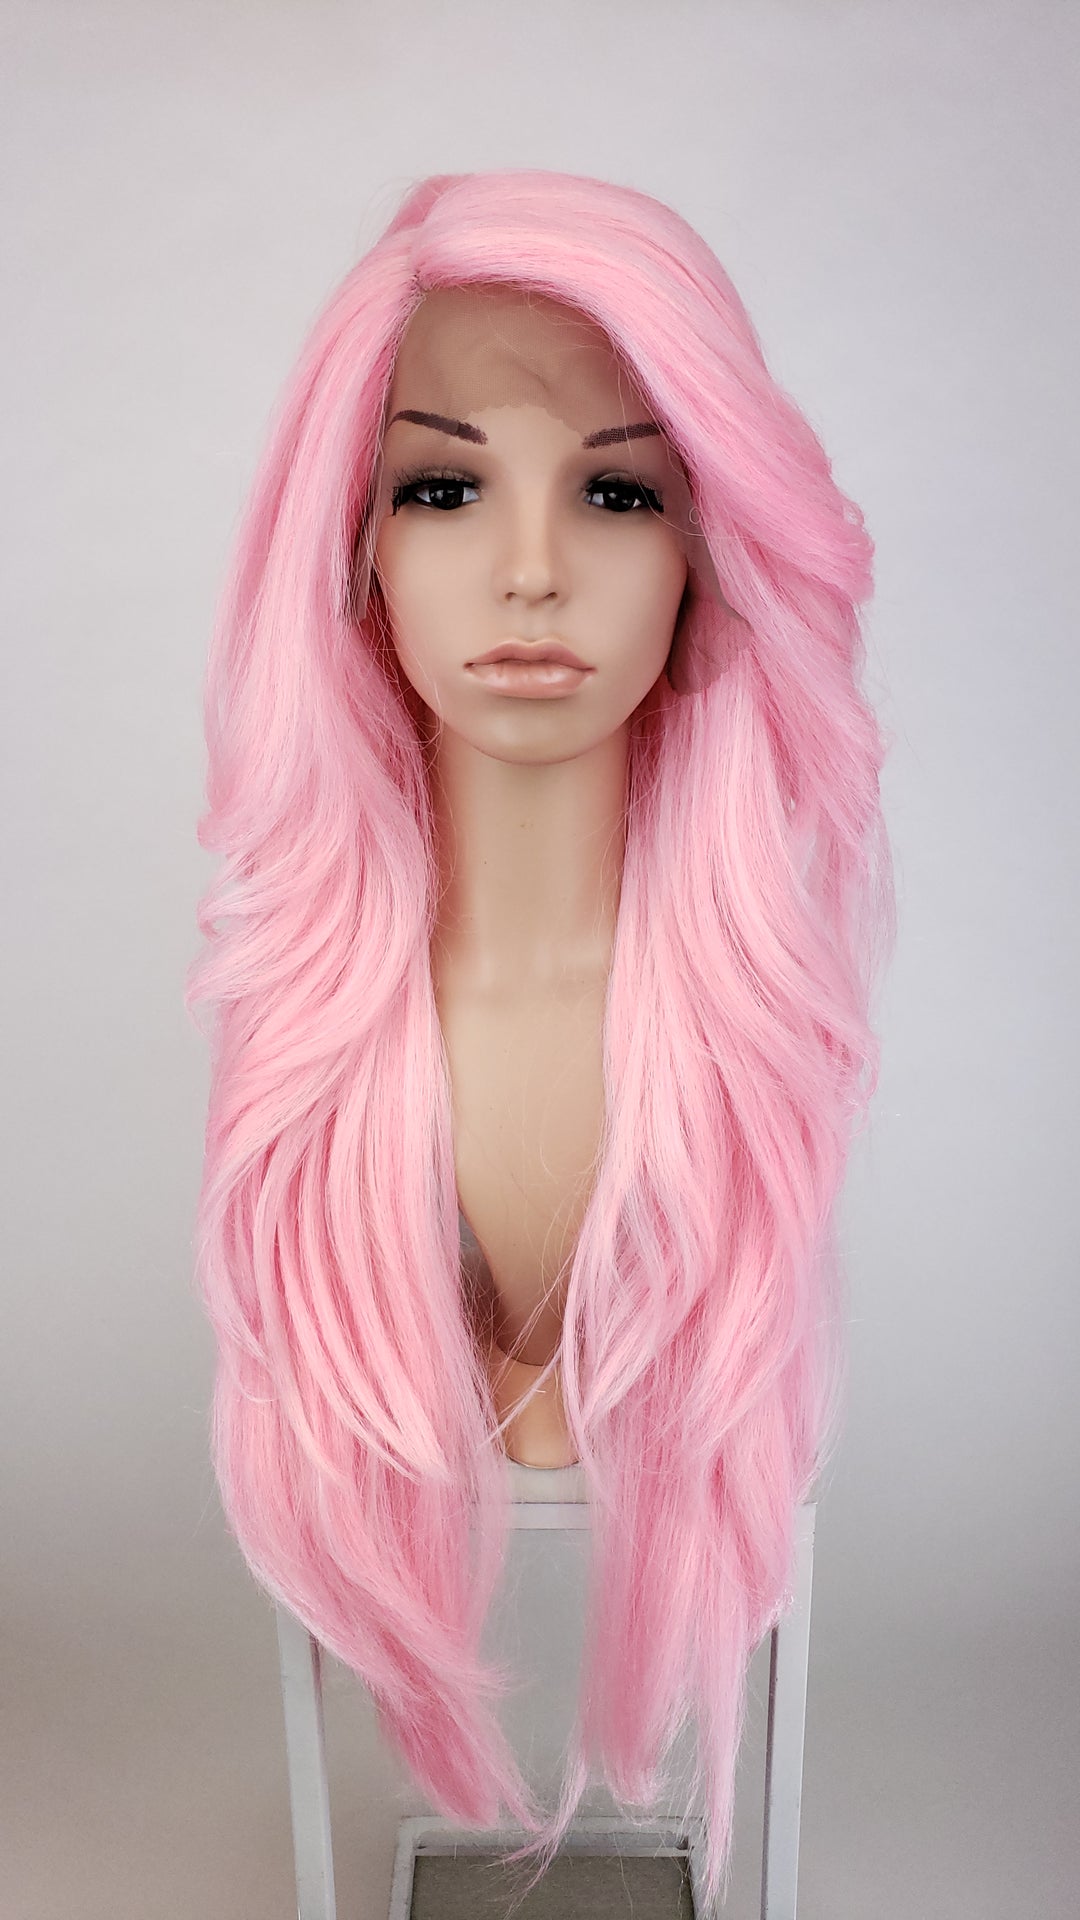 Cherry Blossom Pink Long Wavy with Bangs Lace Front Wig - Duchess Series LDPRU124 pOSE wIGS